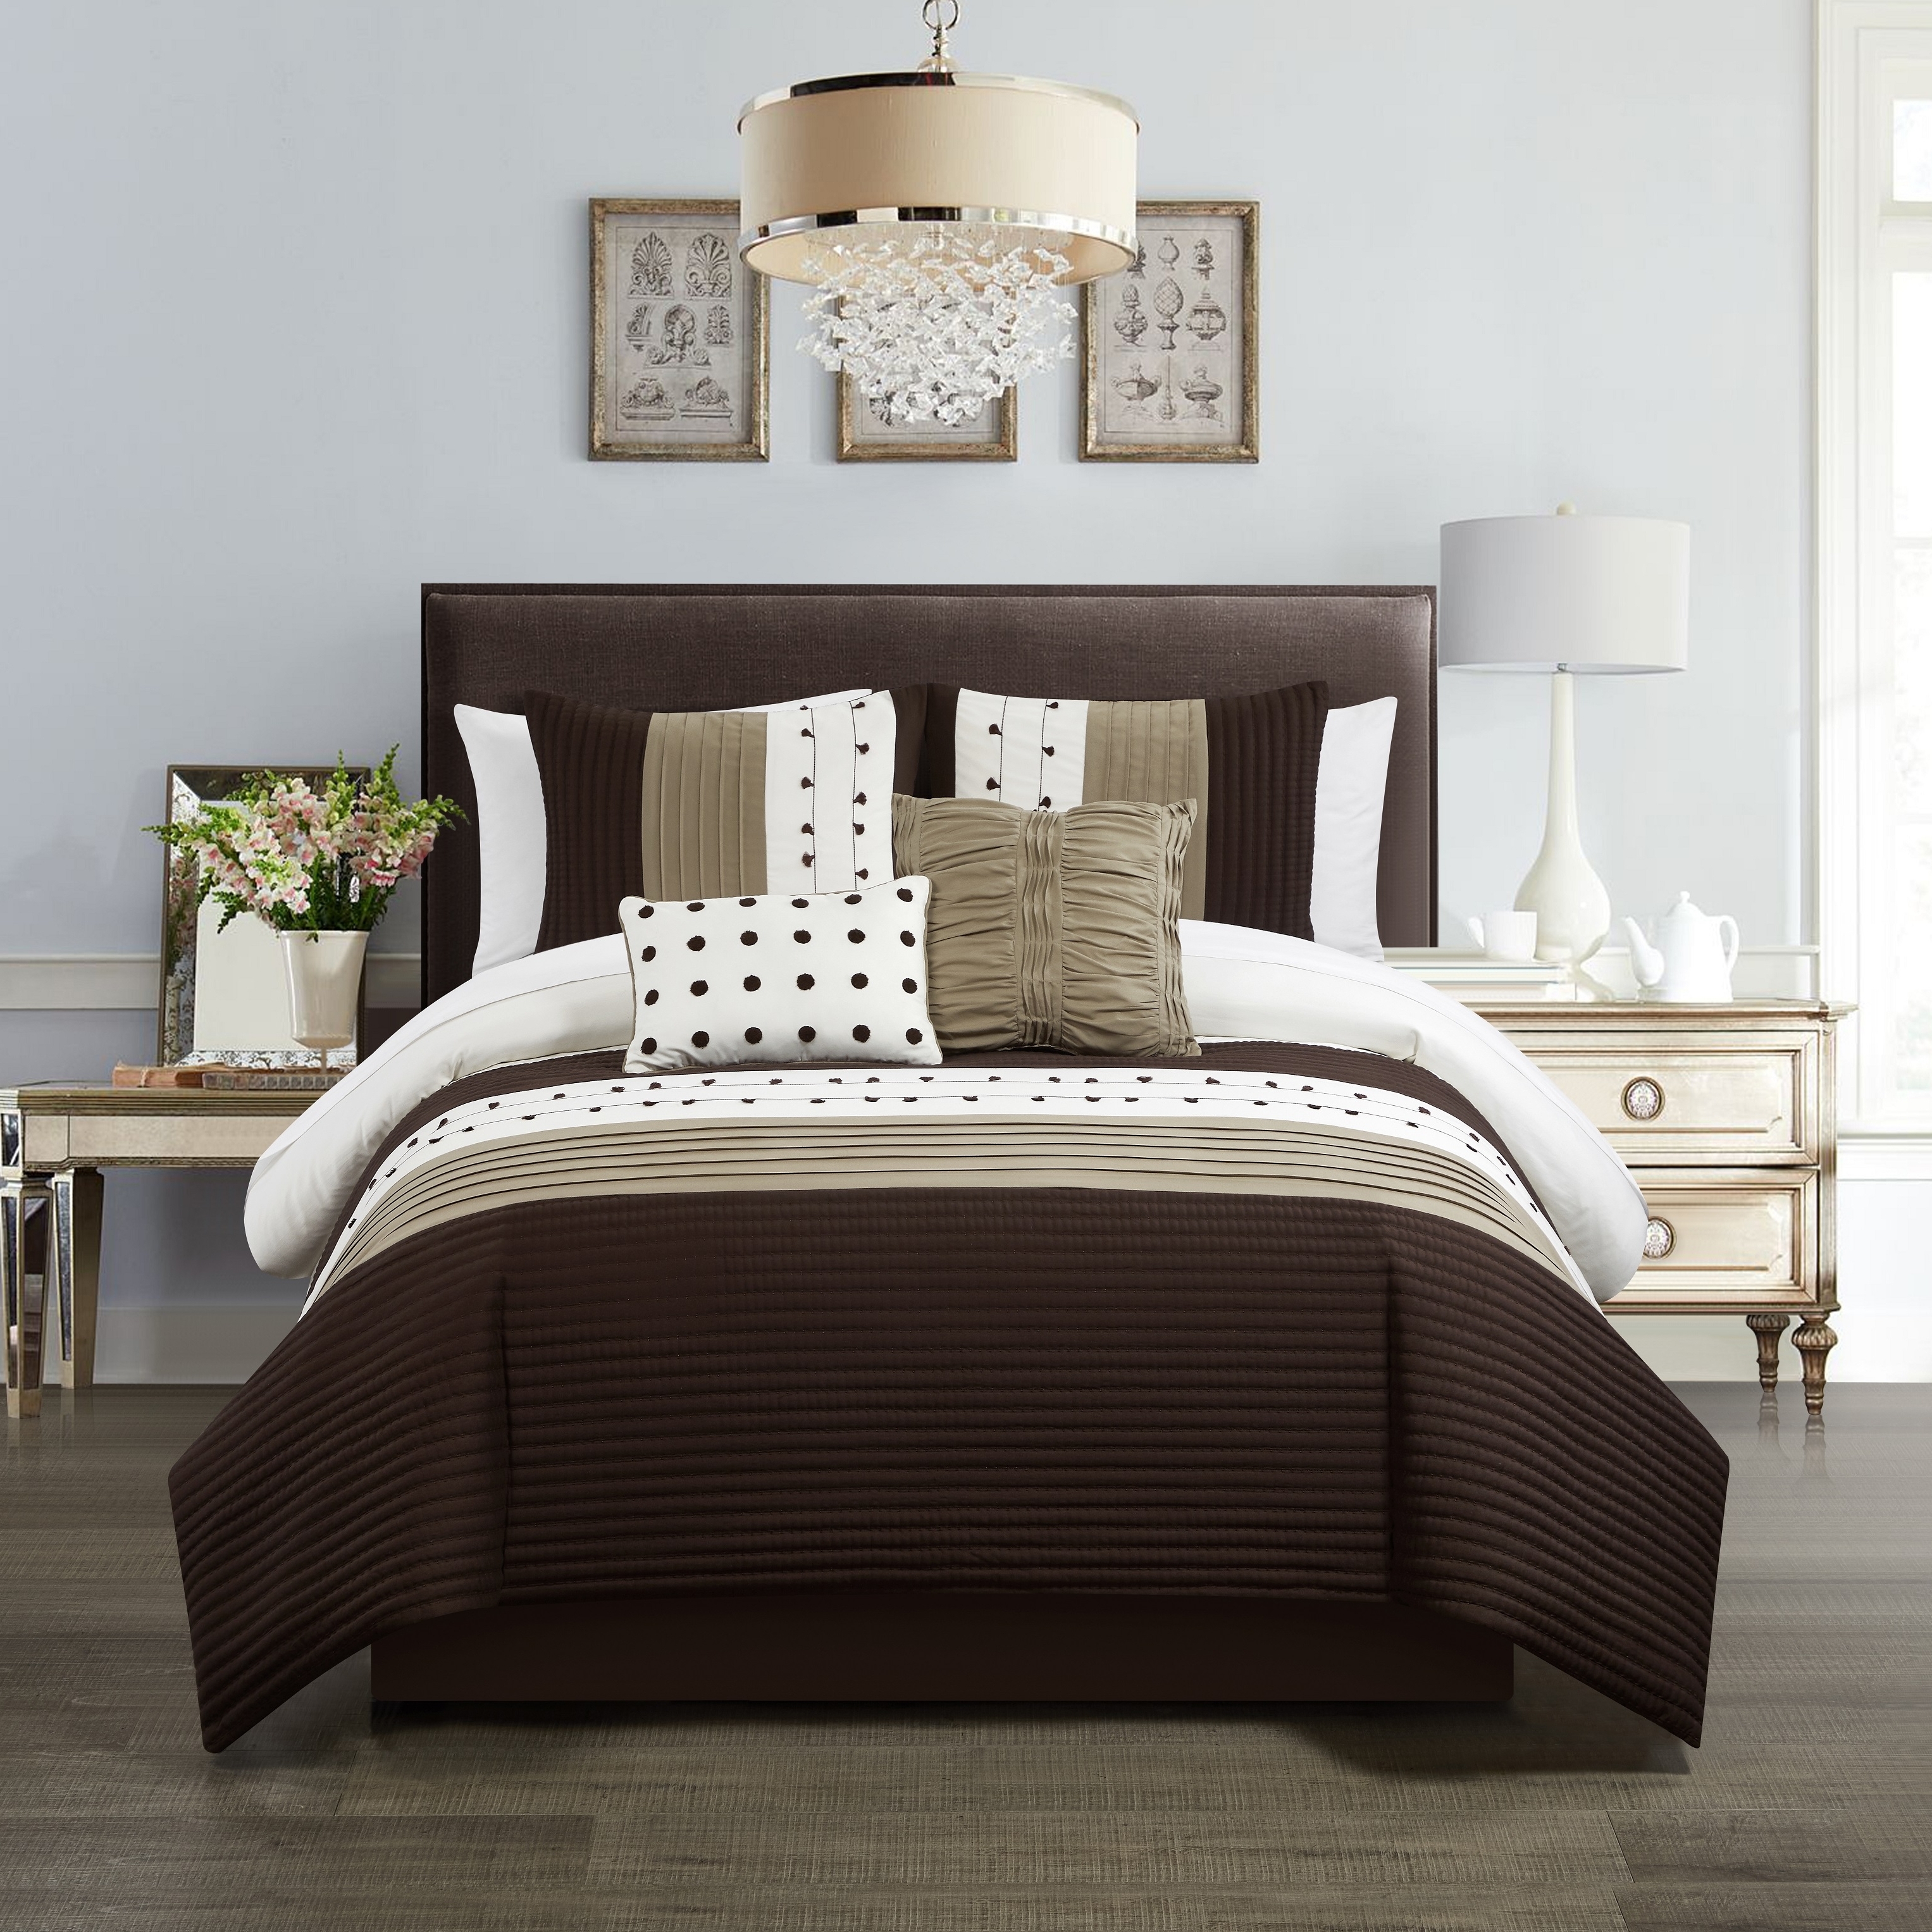 Lainy 5 Piece Comforter Set Color Block Pleated Ribbed Embroidered Bedding - Brown, Queen